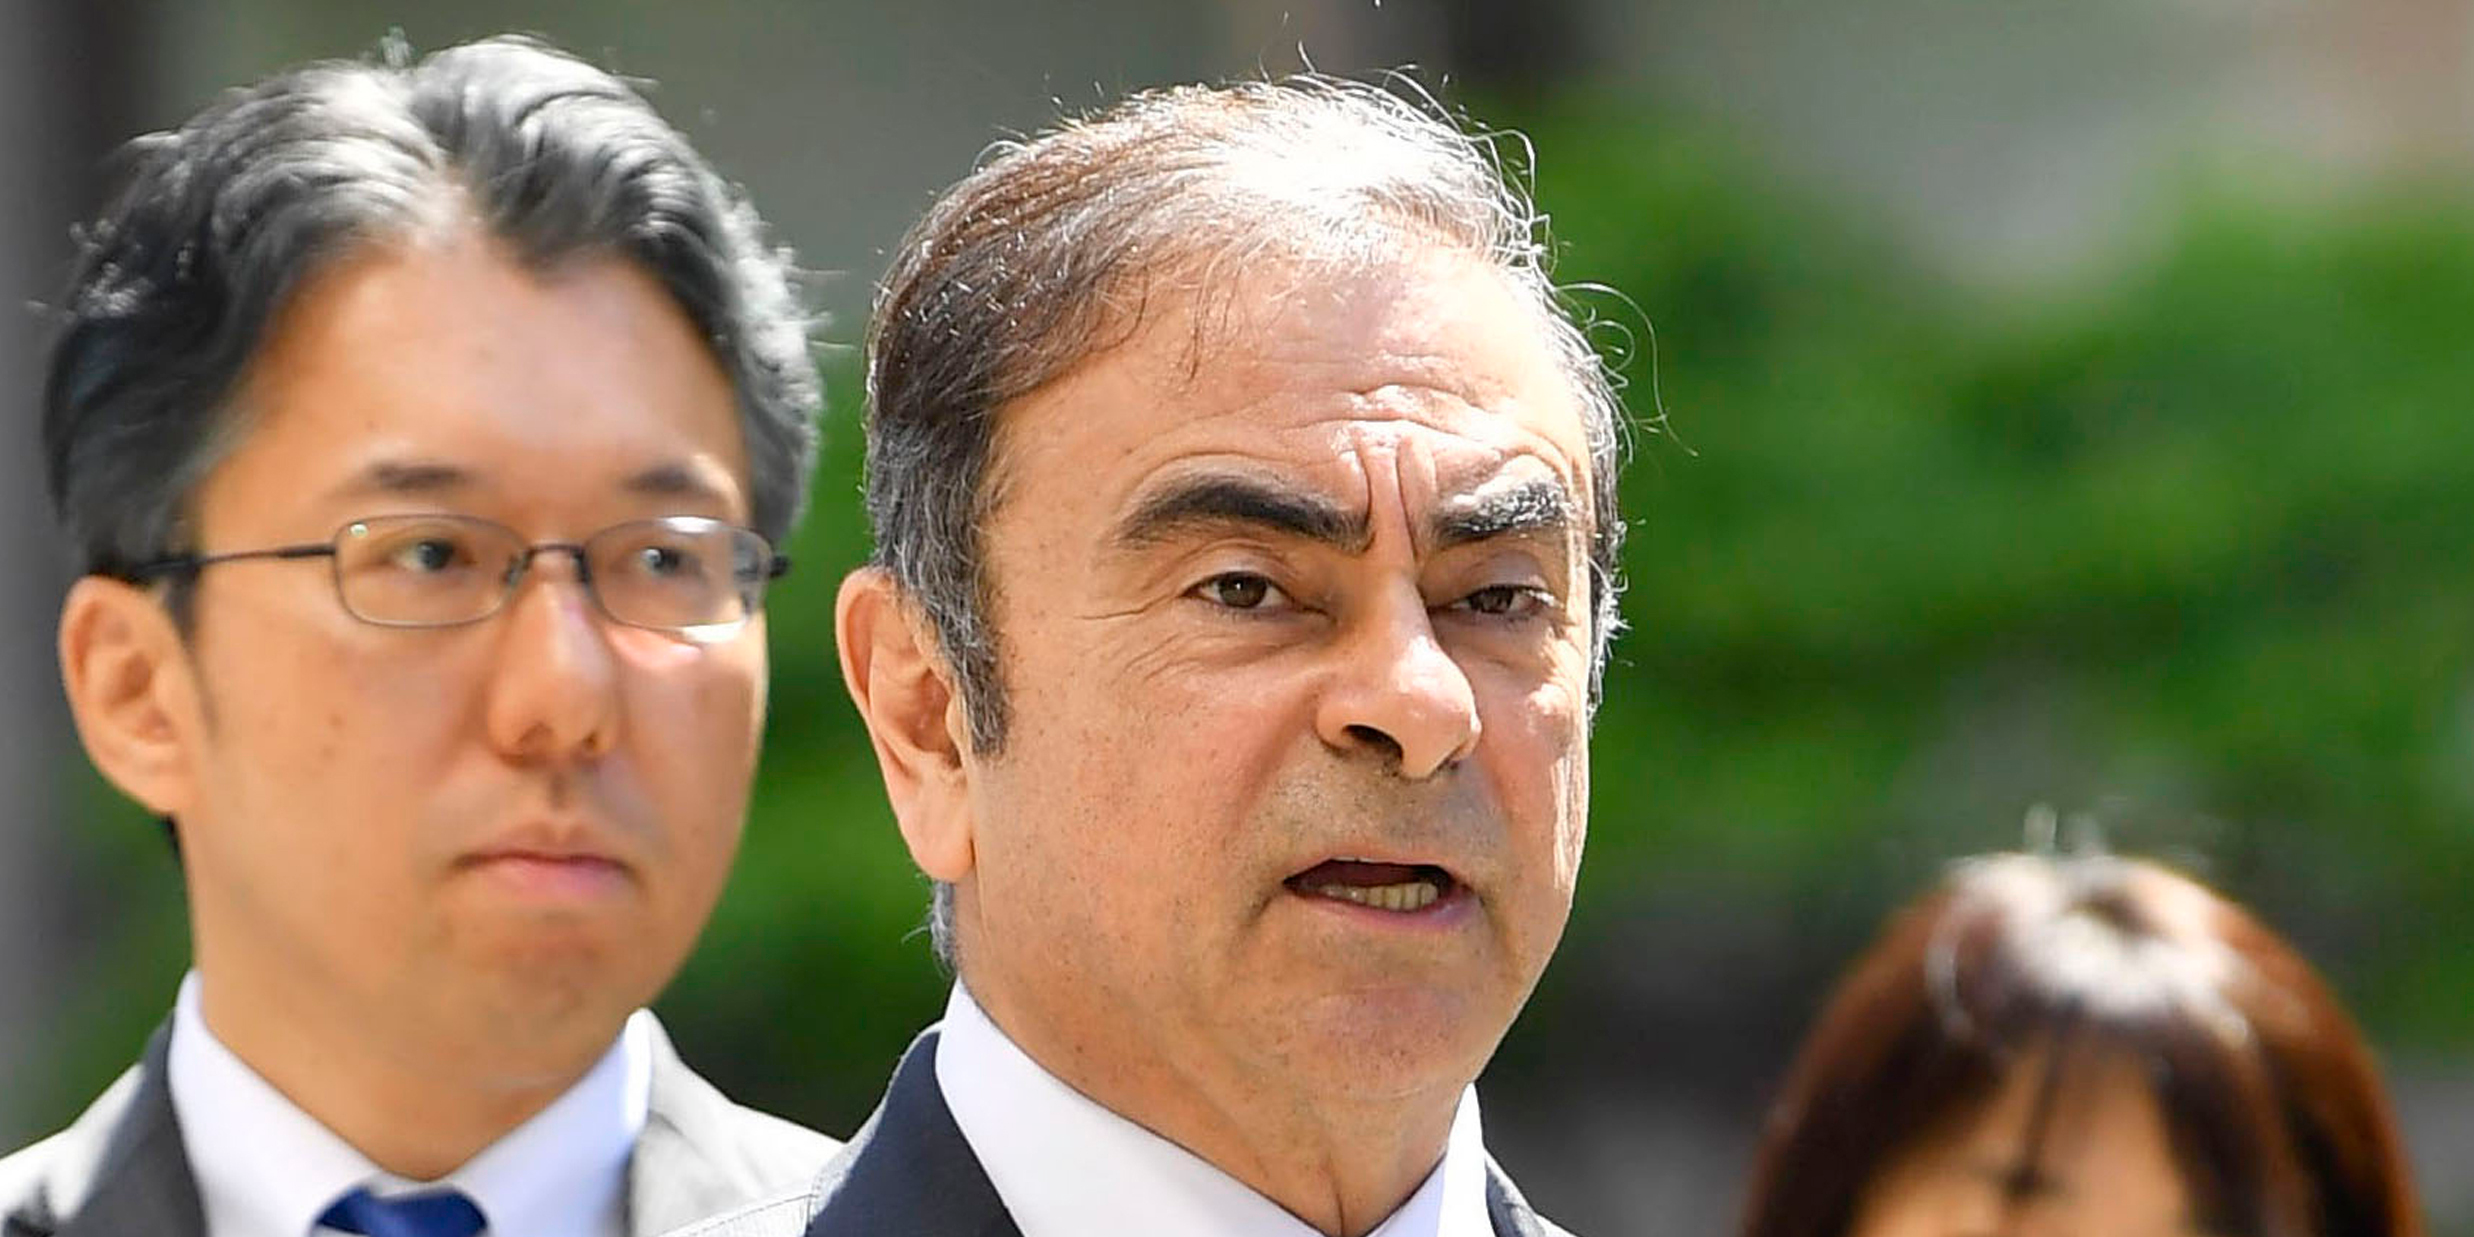 Carlos Ghosn’s escape from Japan is a nightmare for the country’s justice system — and the ousted Nissan exec may now be looking to put that system on trial